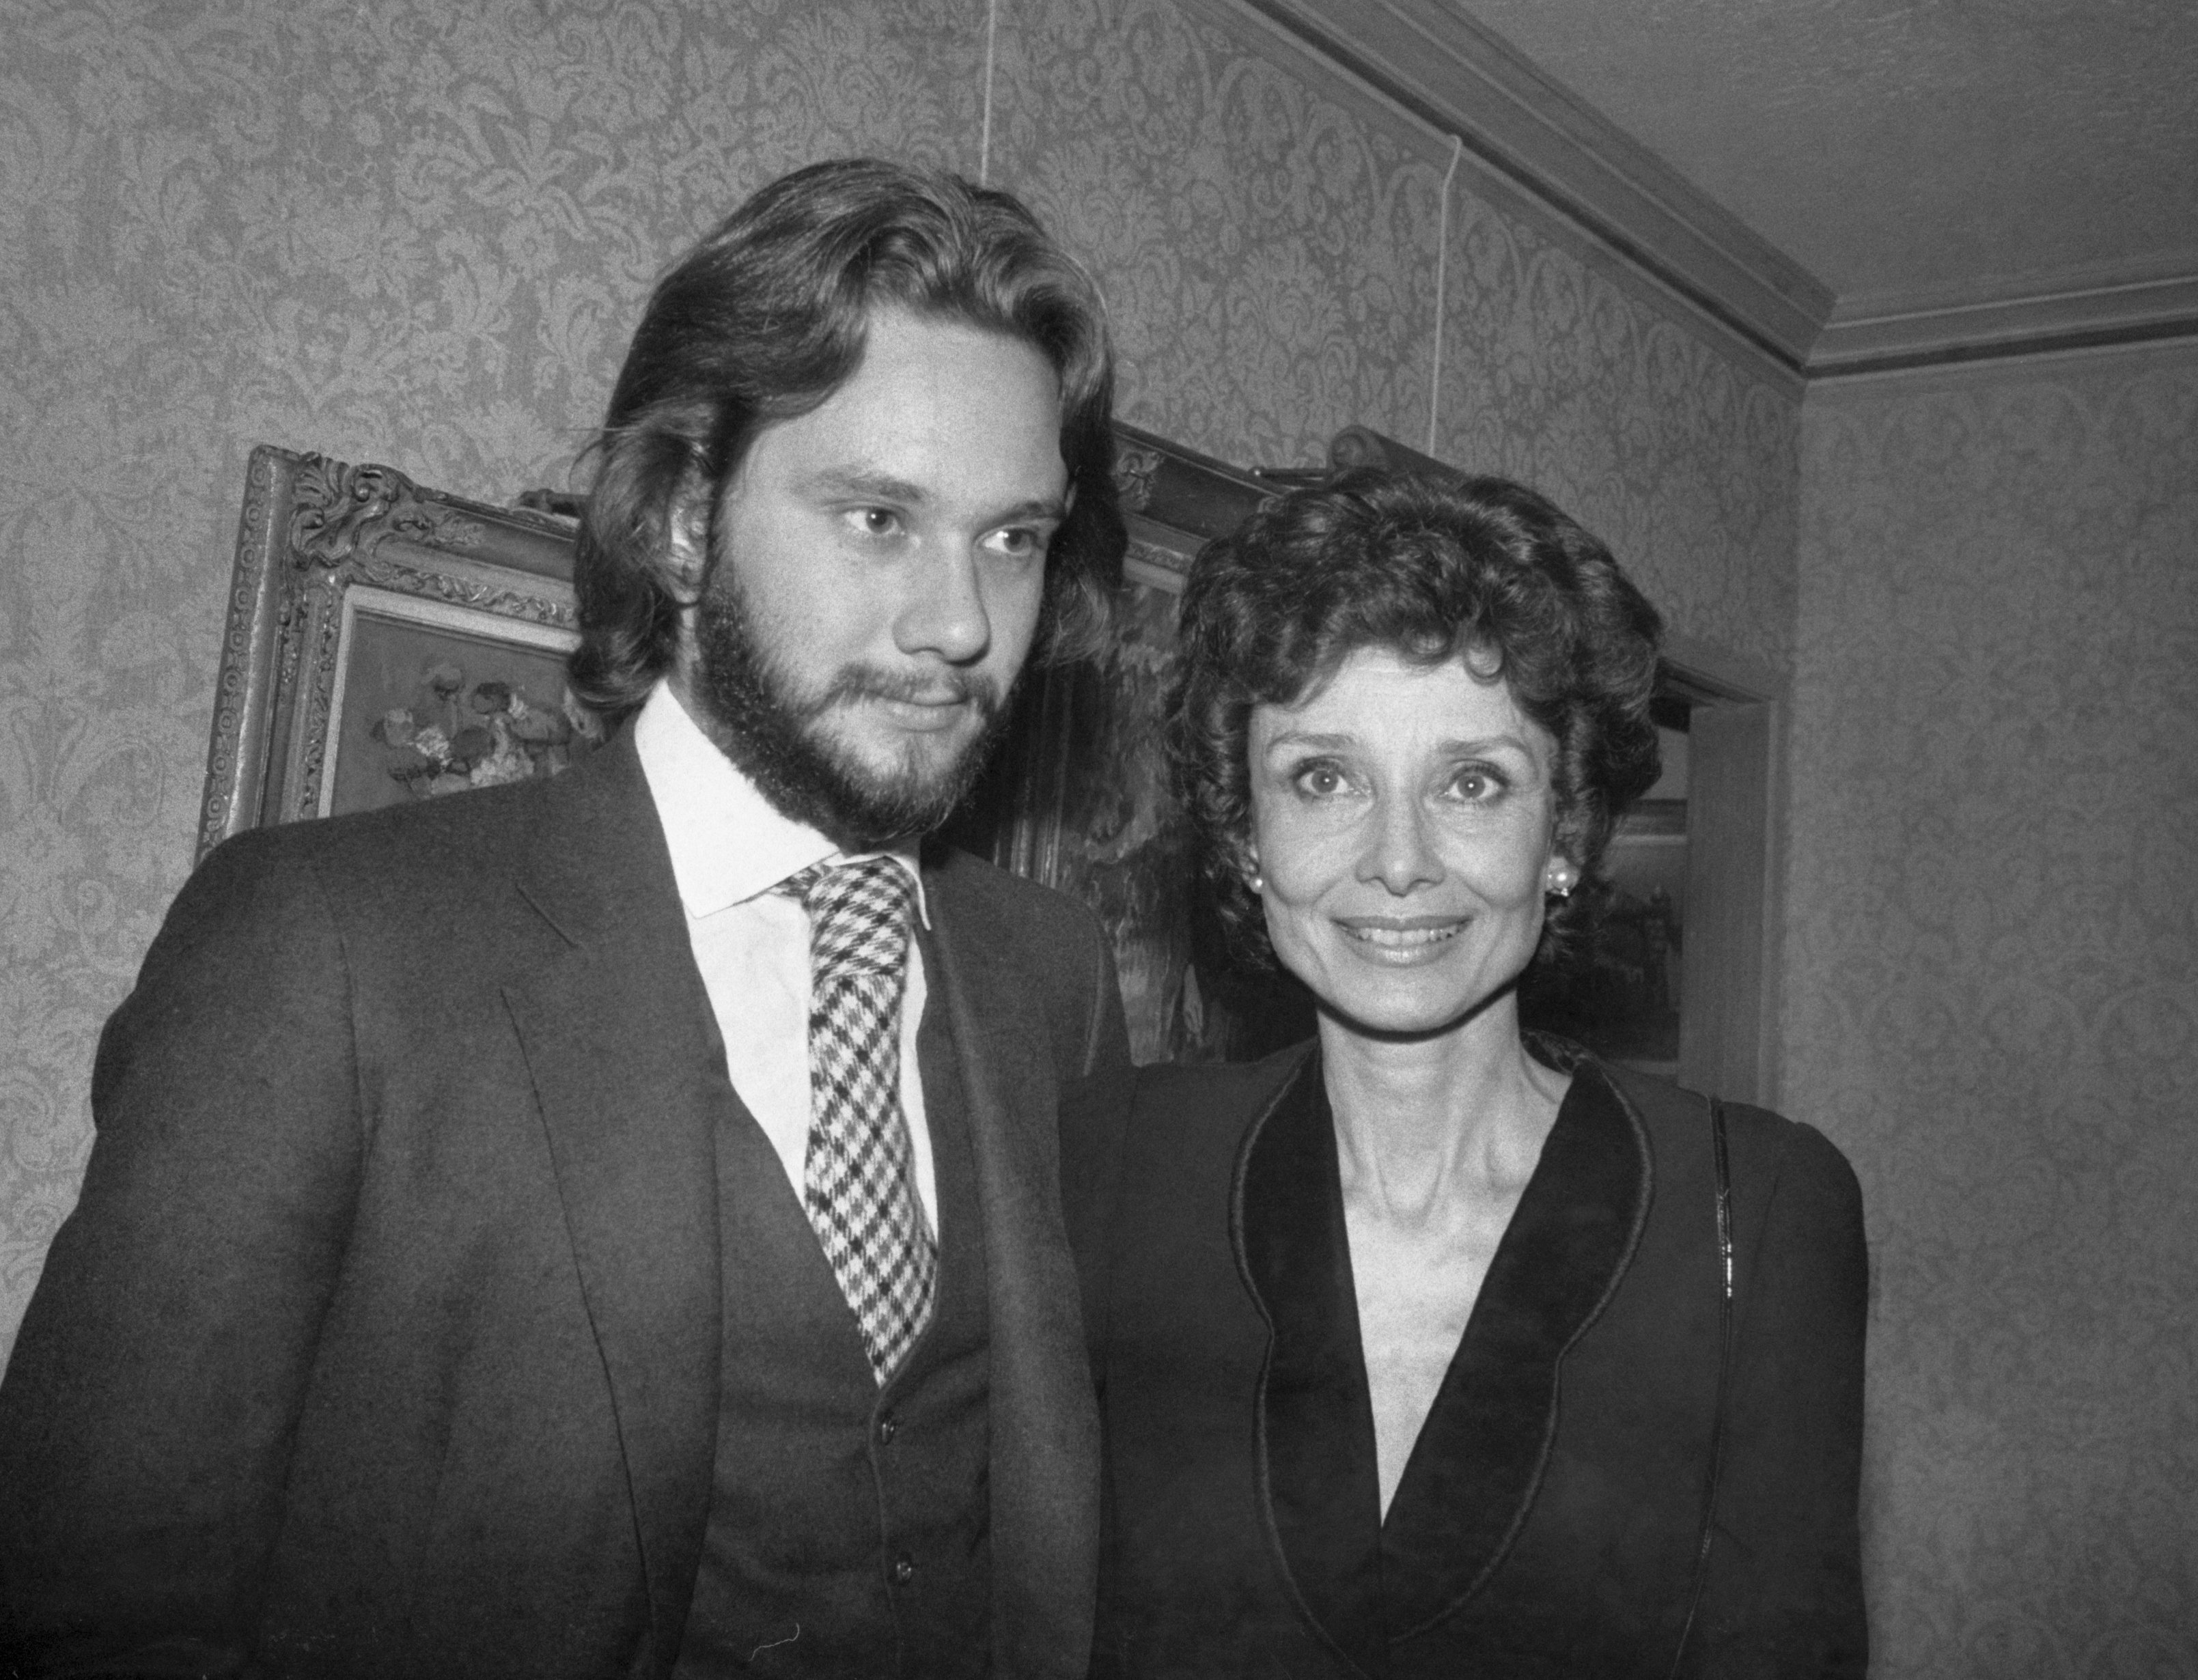 Actress Audrey Hepburn's escort is someone she is very fond of. It's her son, Sean, in 1979 | Source: Getty Images